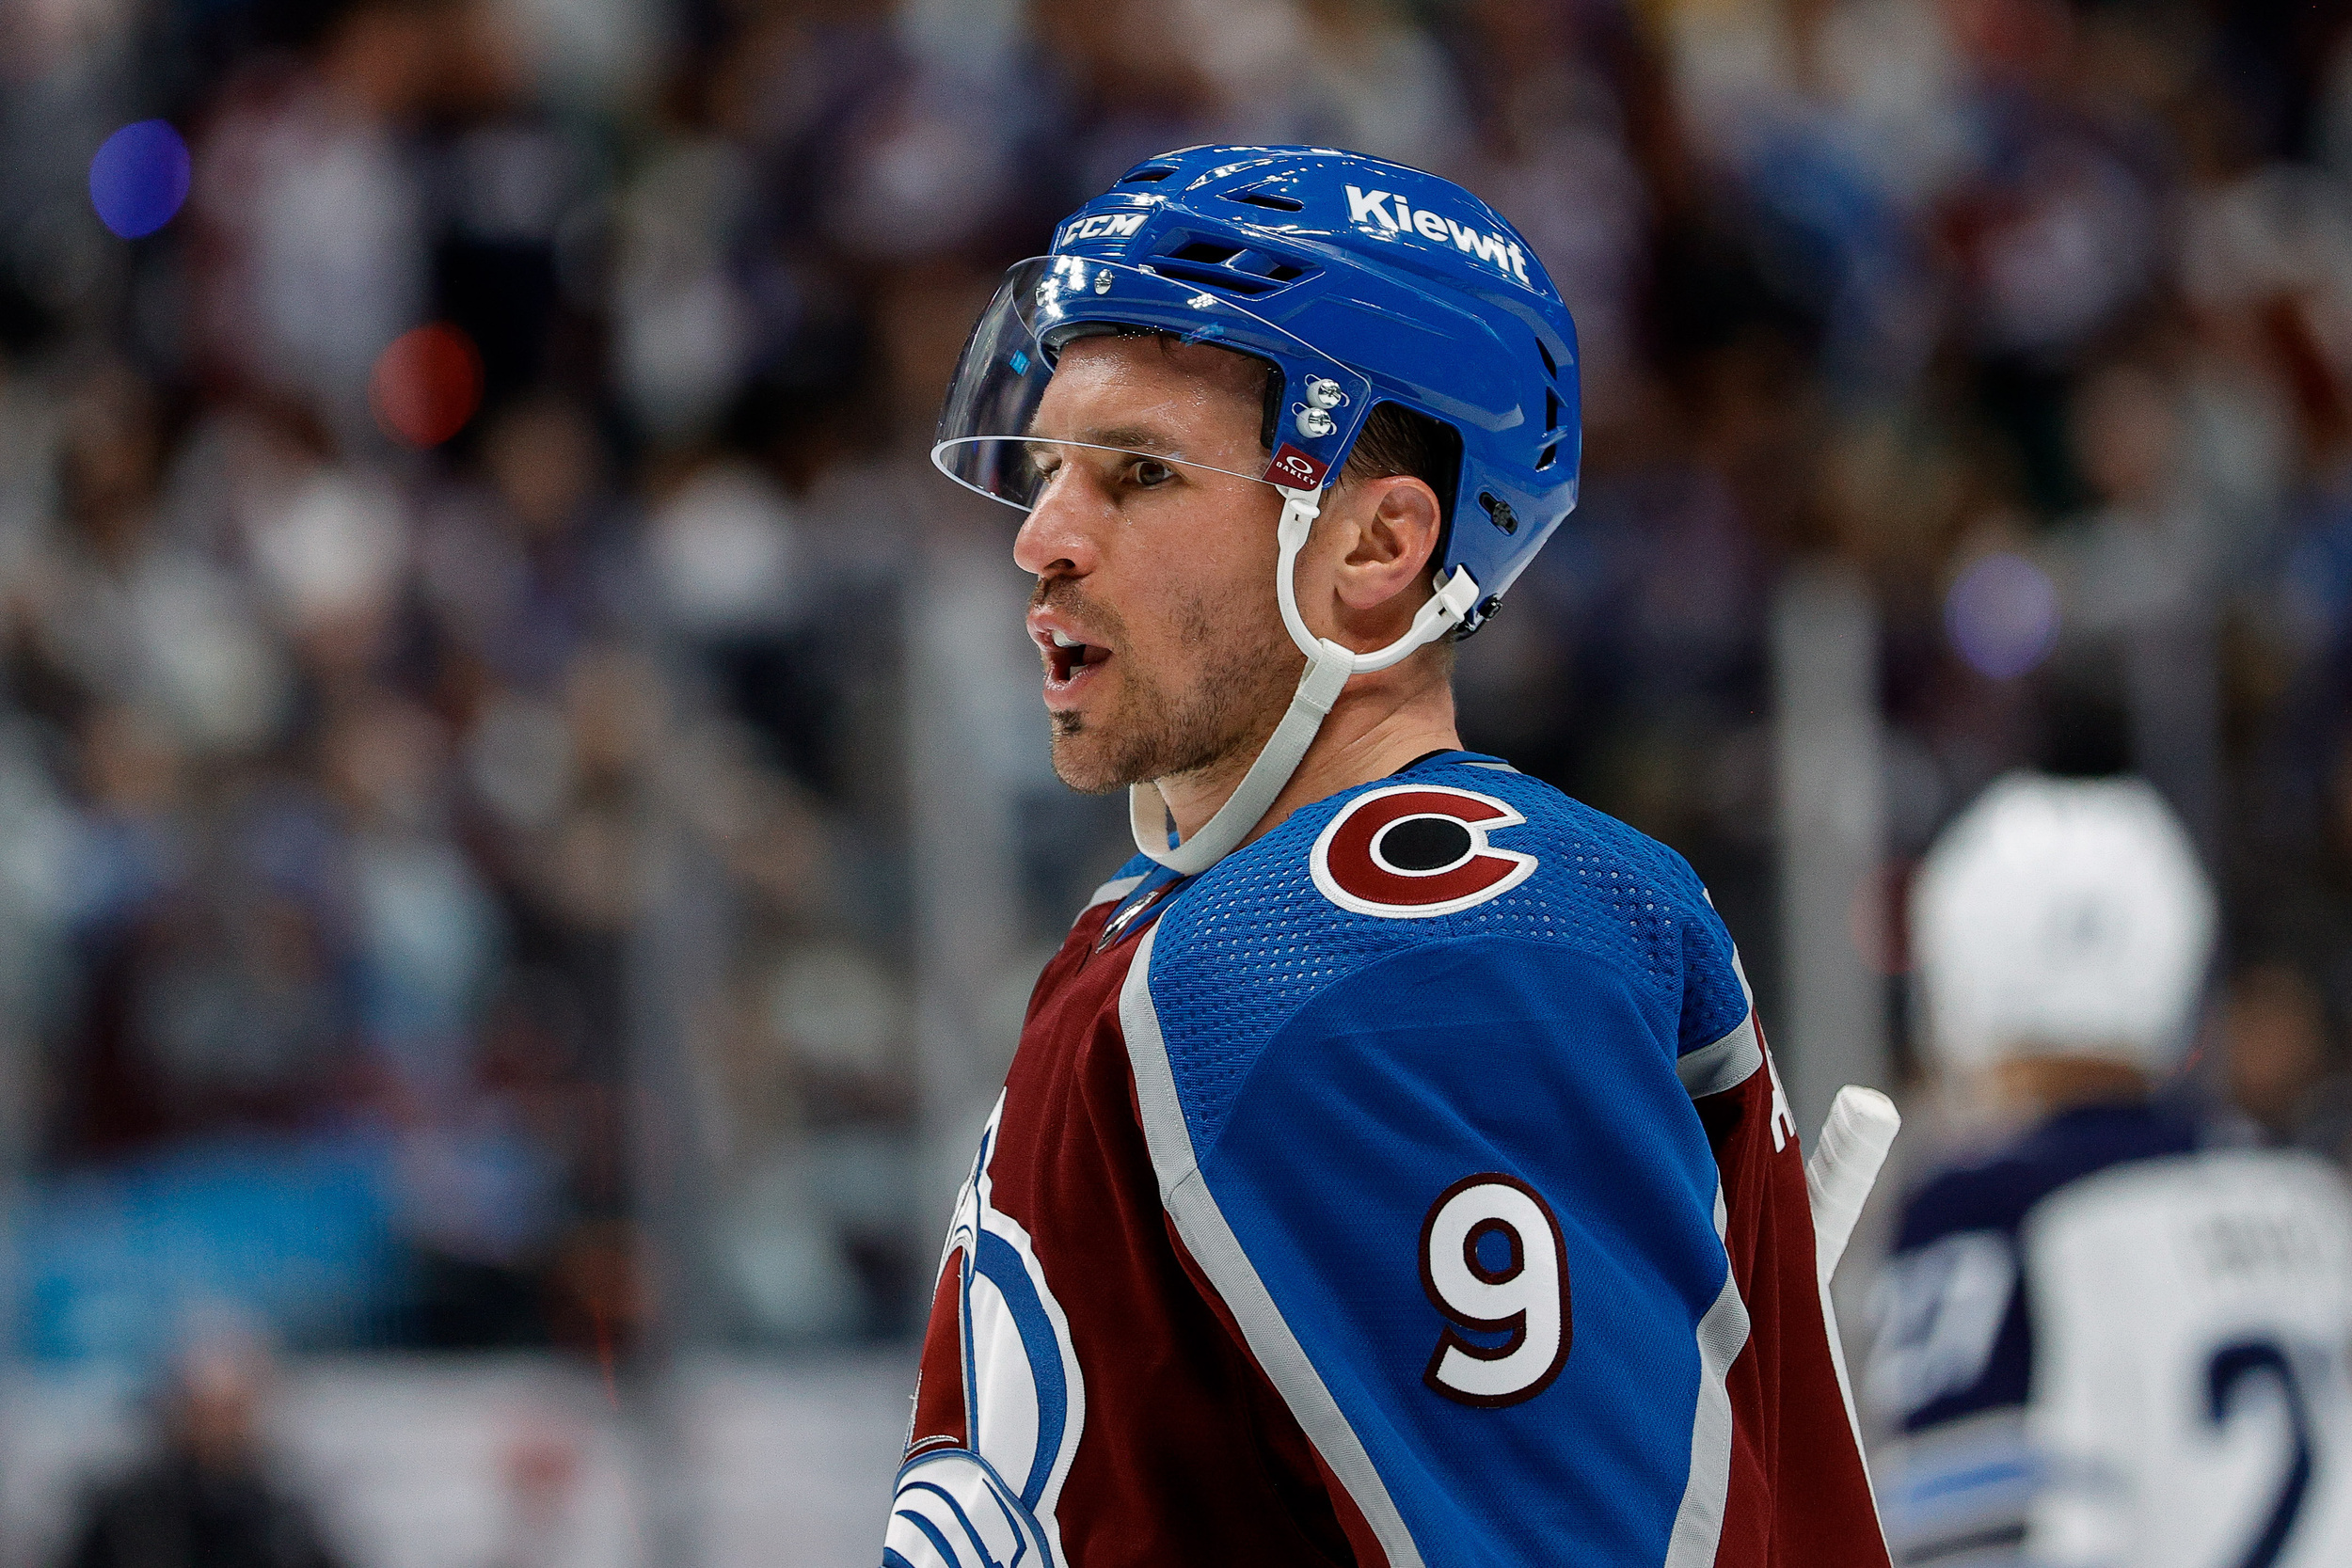 avalanche bury jets with five-goal third period to go up 2-1